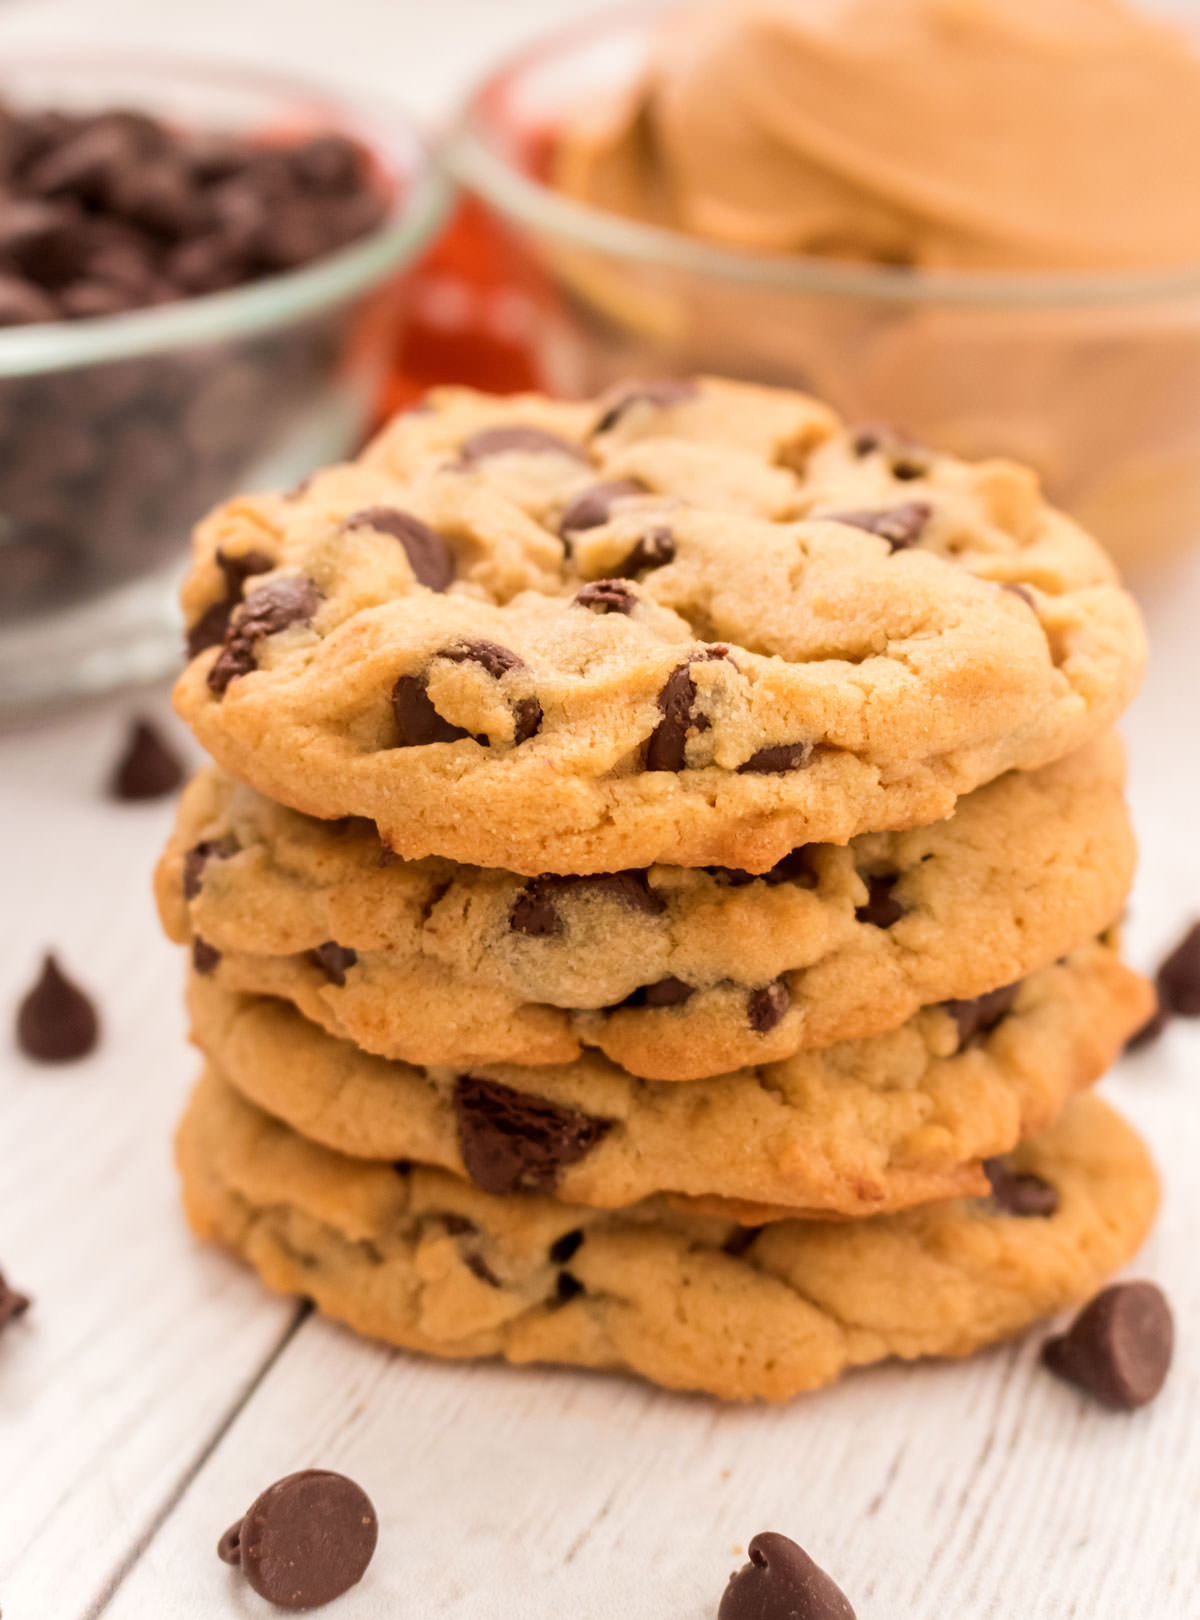 Closeup on a stack of Peanut Butter Chocolate Chip Cookies sitting on a white table in front of glass bowls filled with peanut butter and chocolate chips.